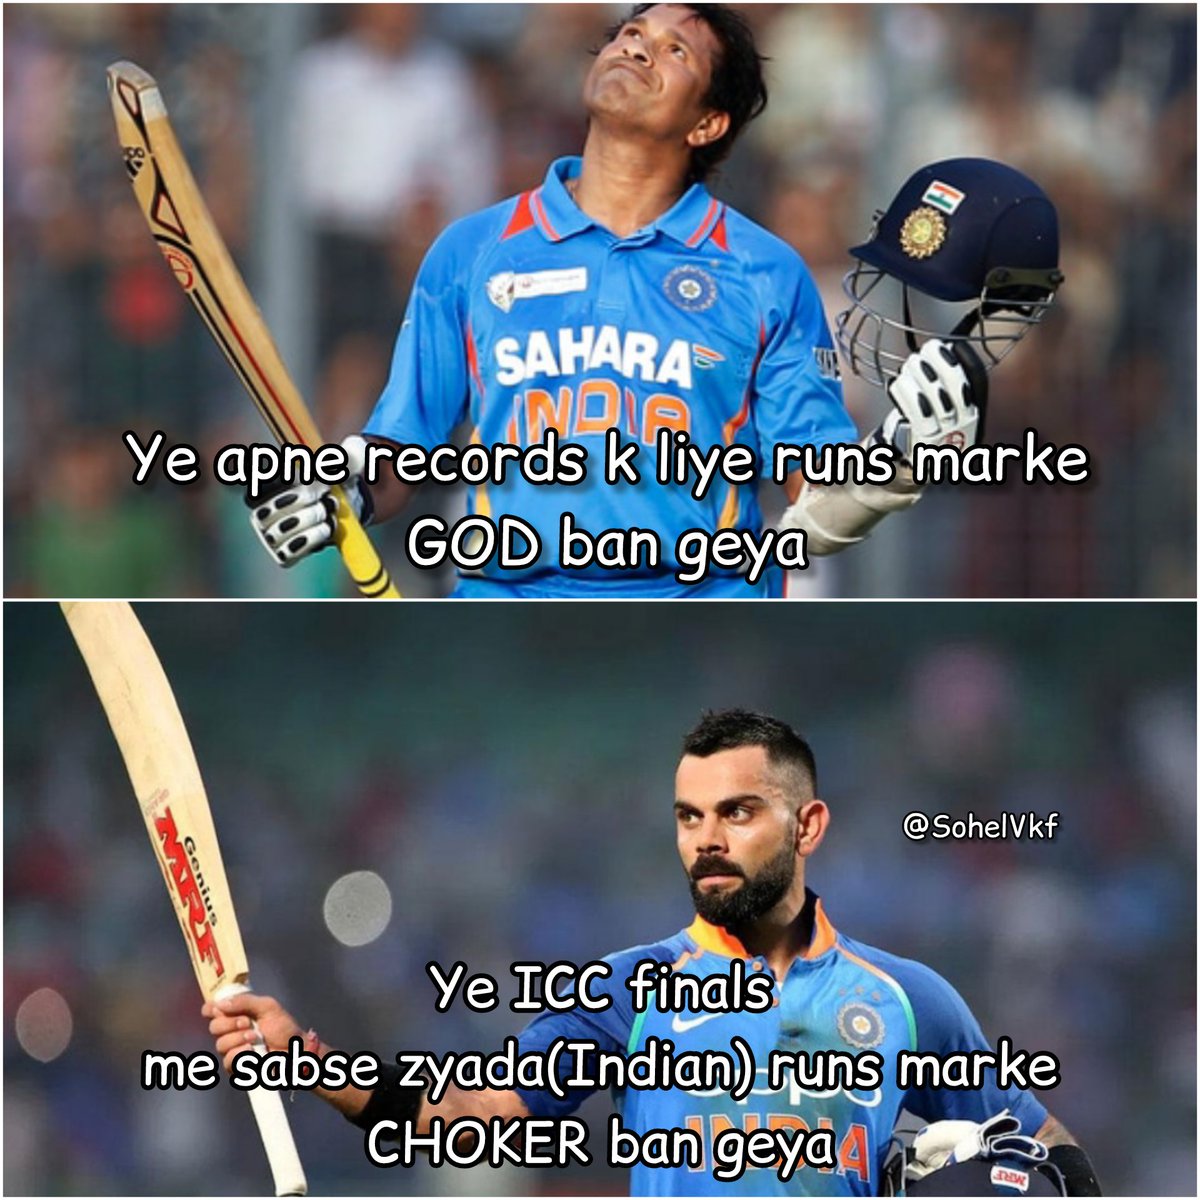 Why Virat Kohli gets this much hate from his own countryman after doing so much?